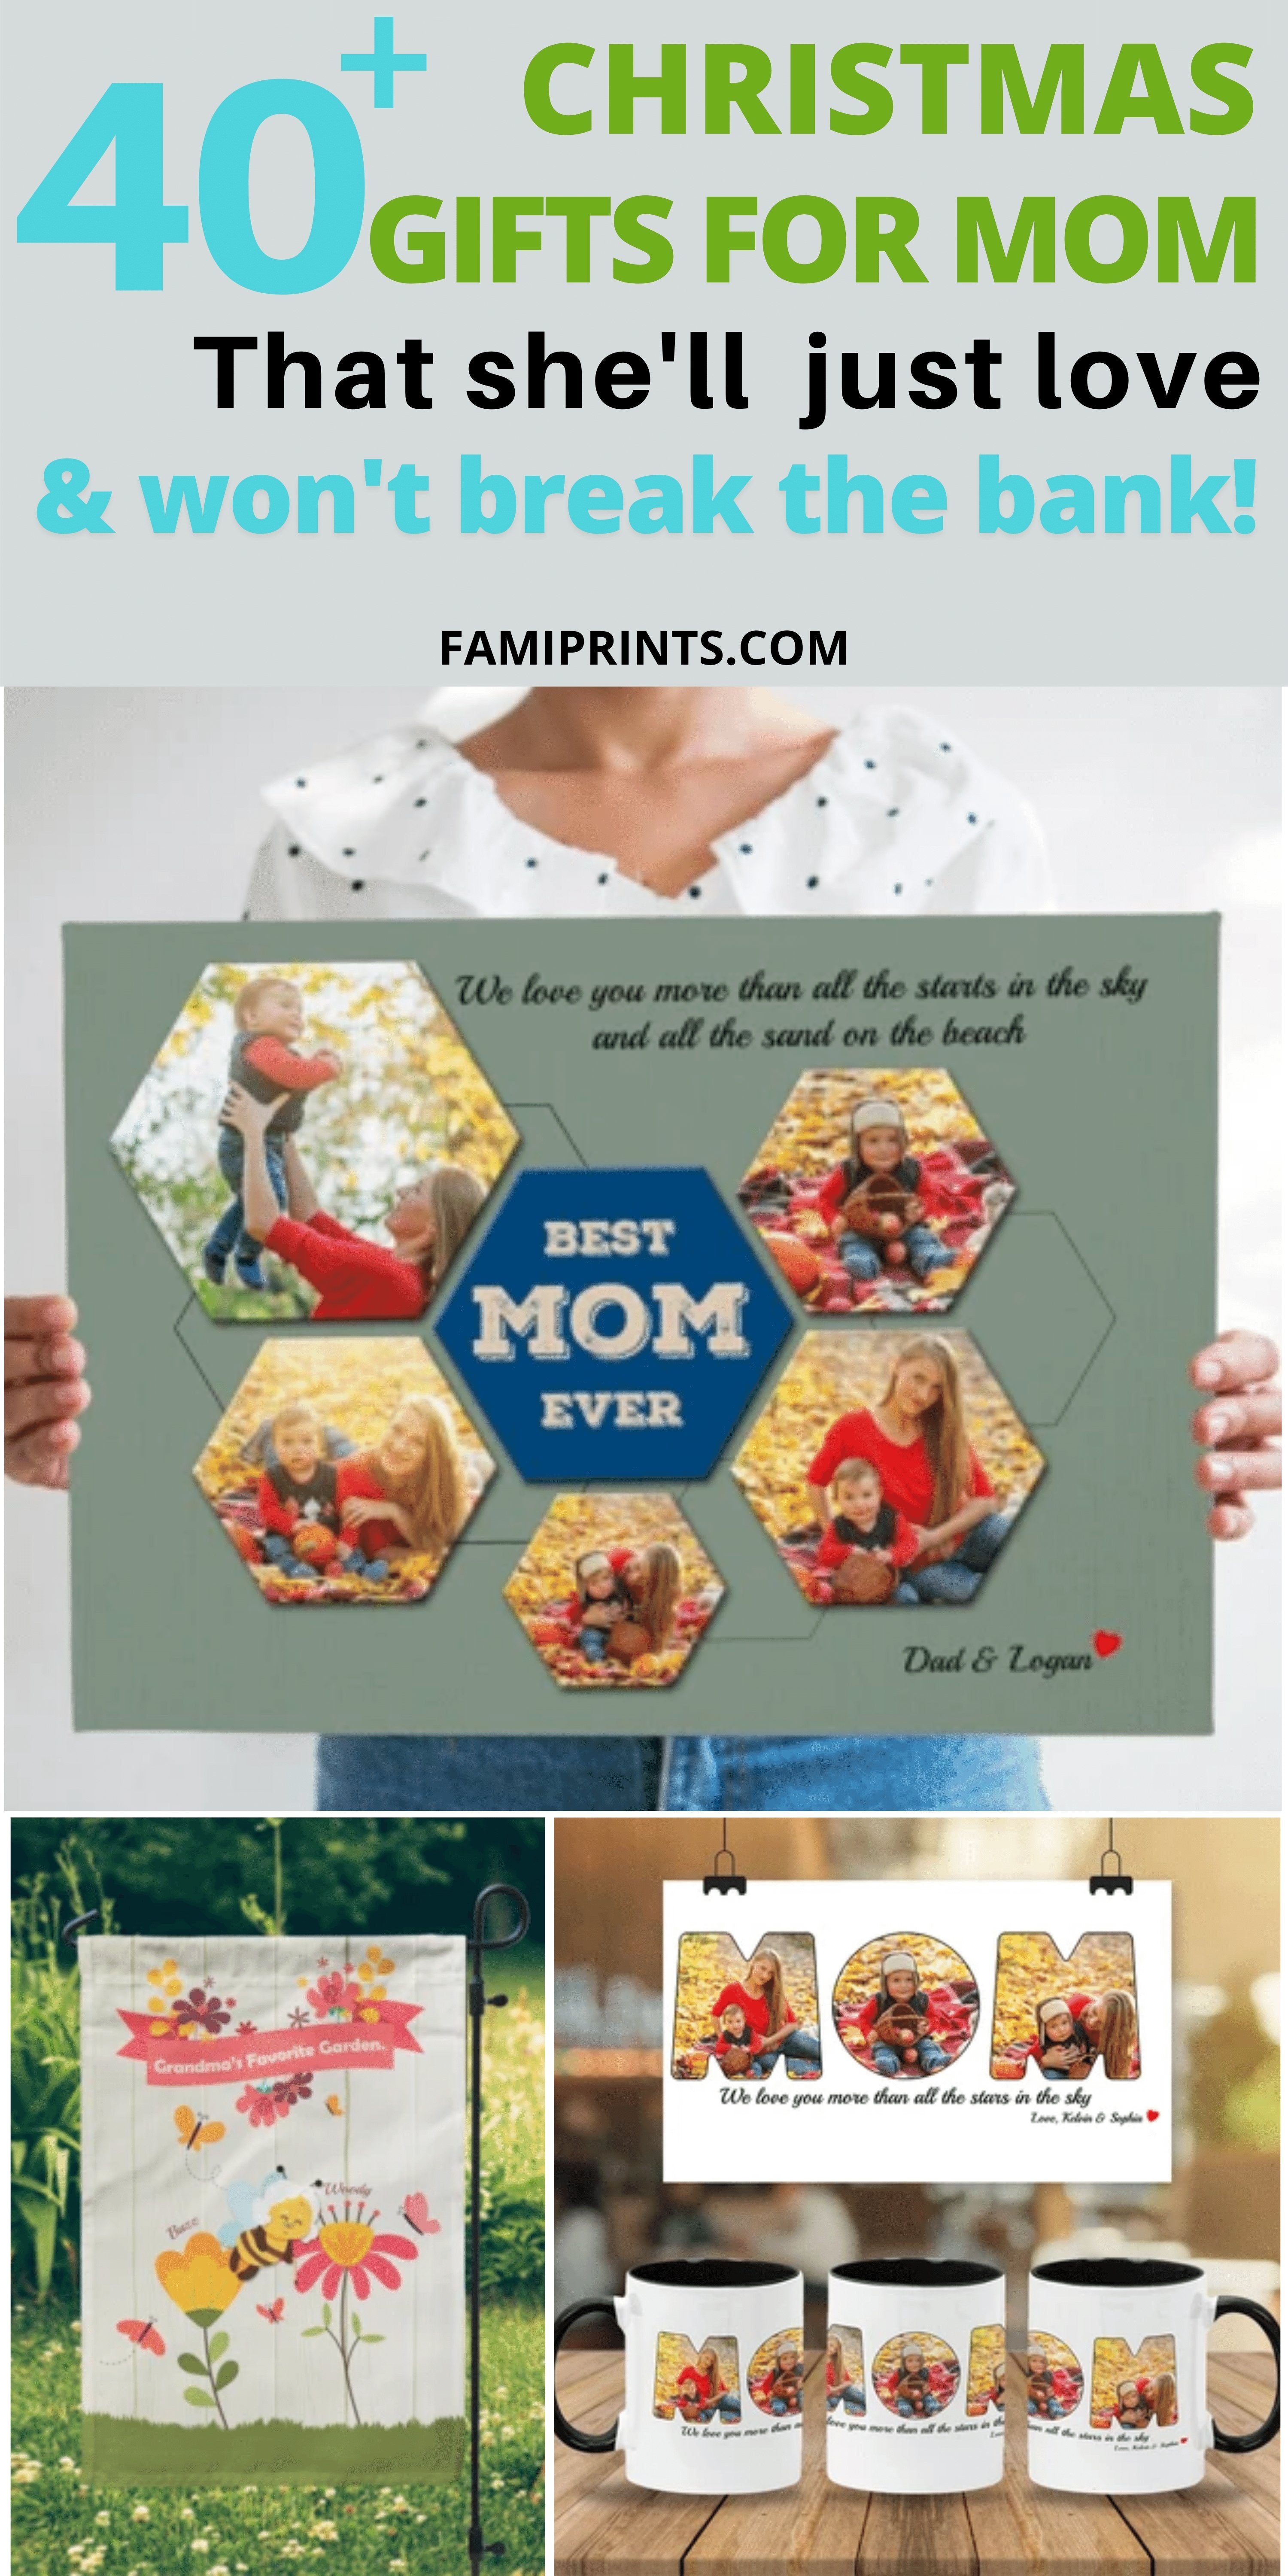 Personalized Christmas Gifts for Mom | FamiPrints | Trending Personalized Family Gifts